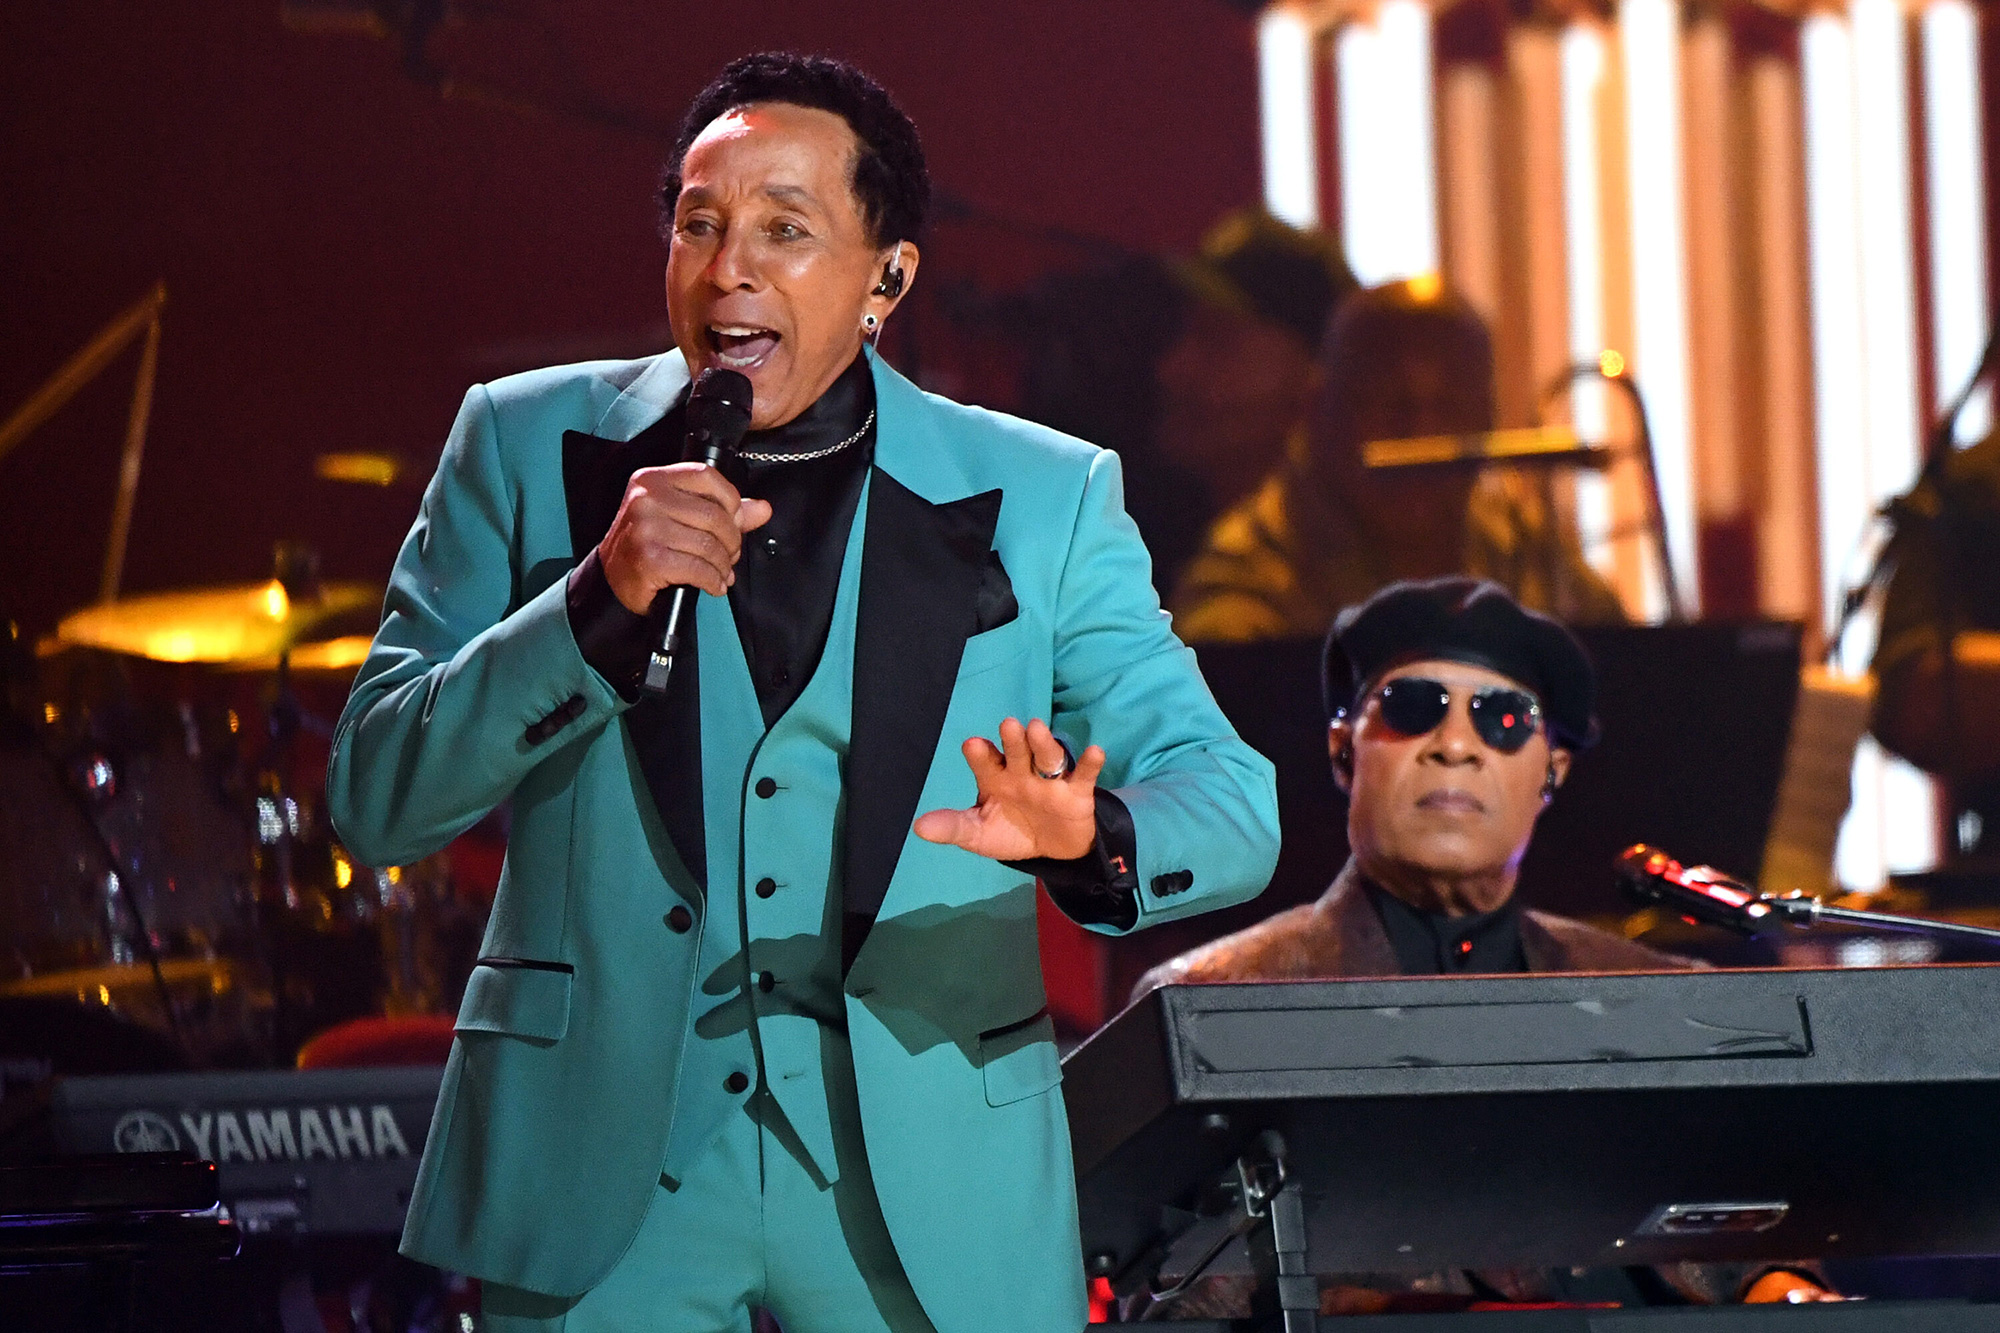 Legends Smokey Robinson and Stevie Wonder perform together during the show.